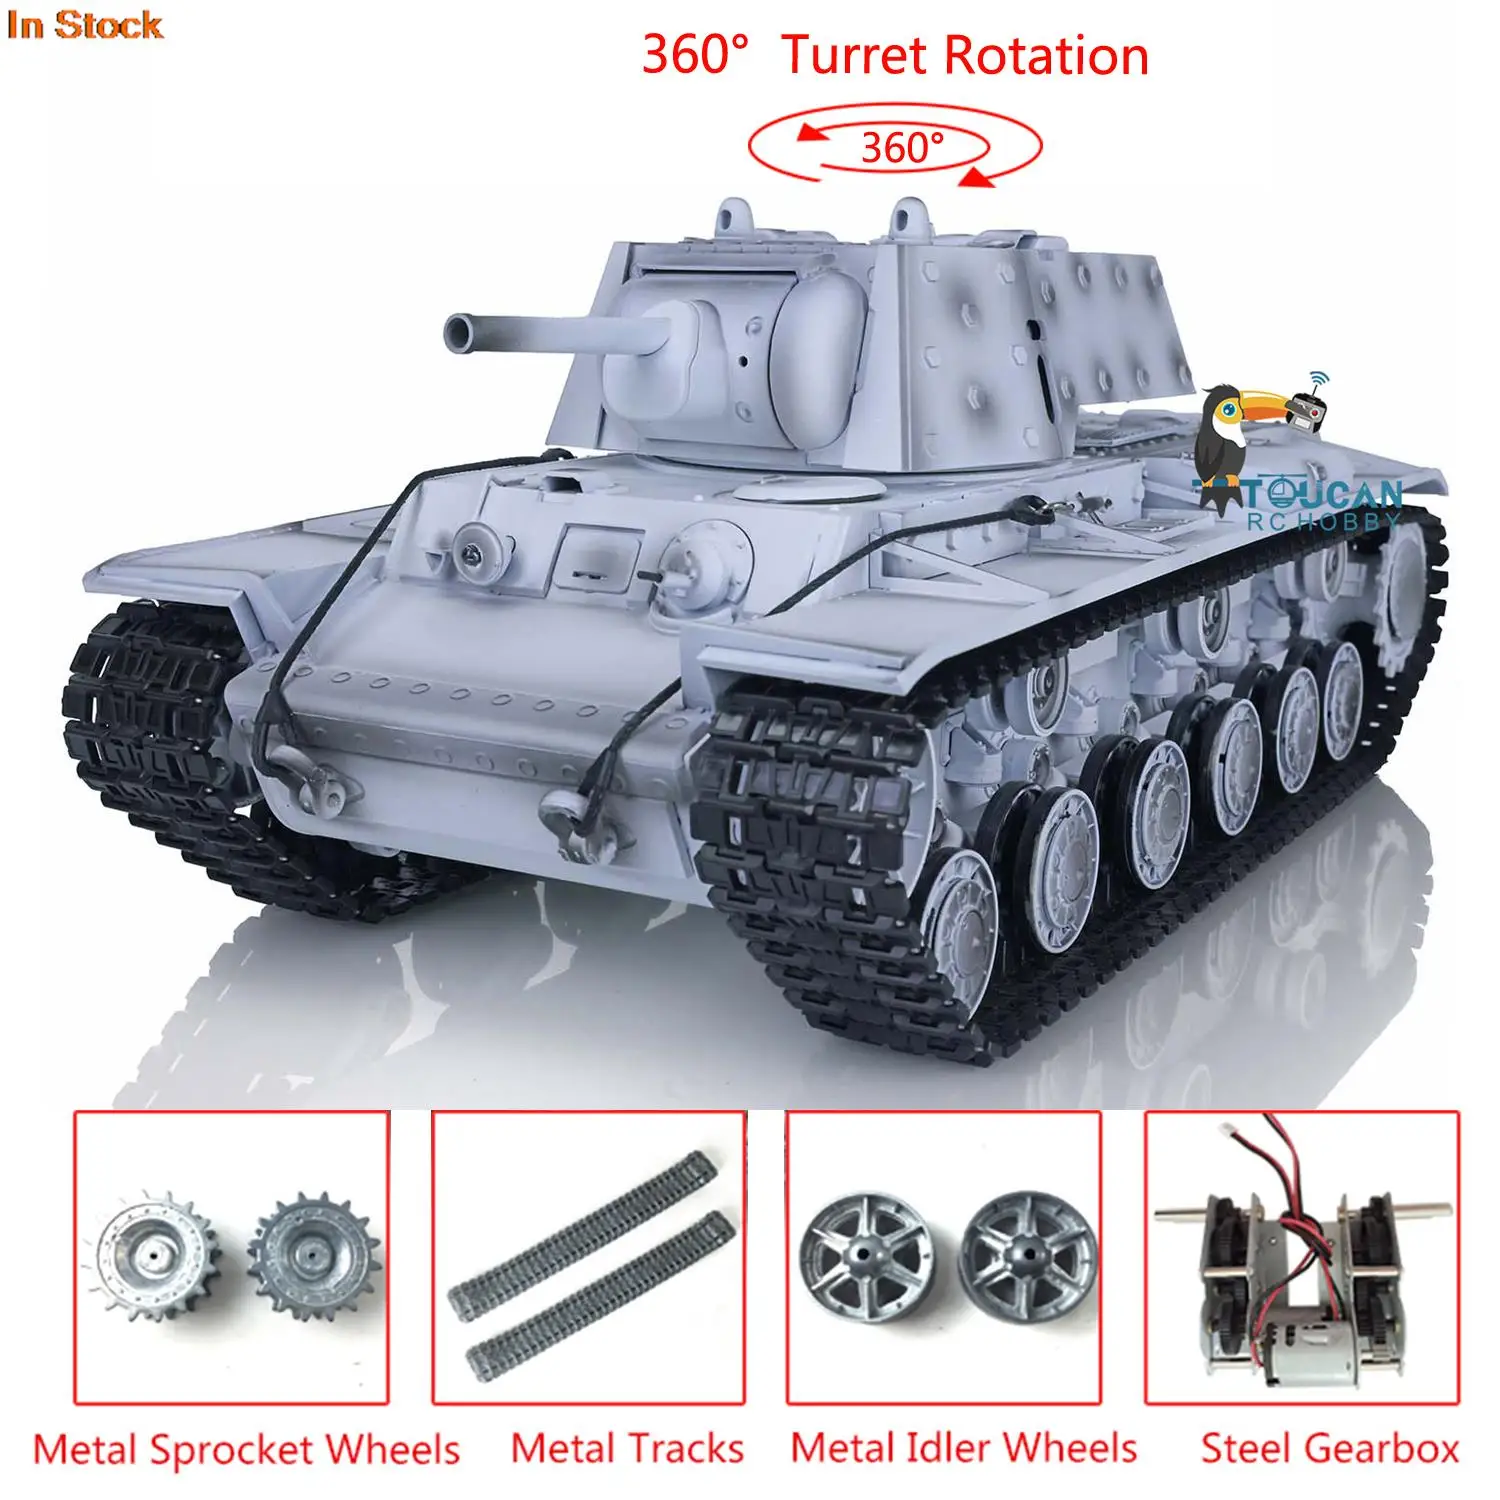 

Henglong 1/16 Upgraded Ver Snow 7.0 Soviet KV-1 RC Tank 3878 W/360 Turret BB Airsoft Realistic Sound Military Toys TH17473-SMT7